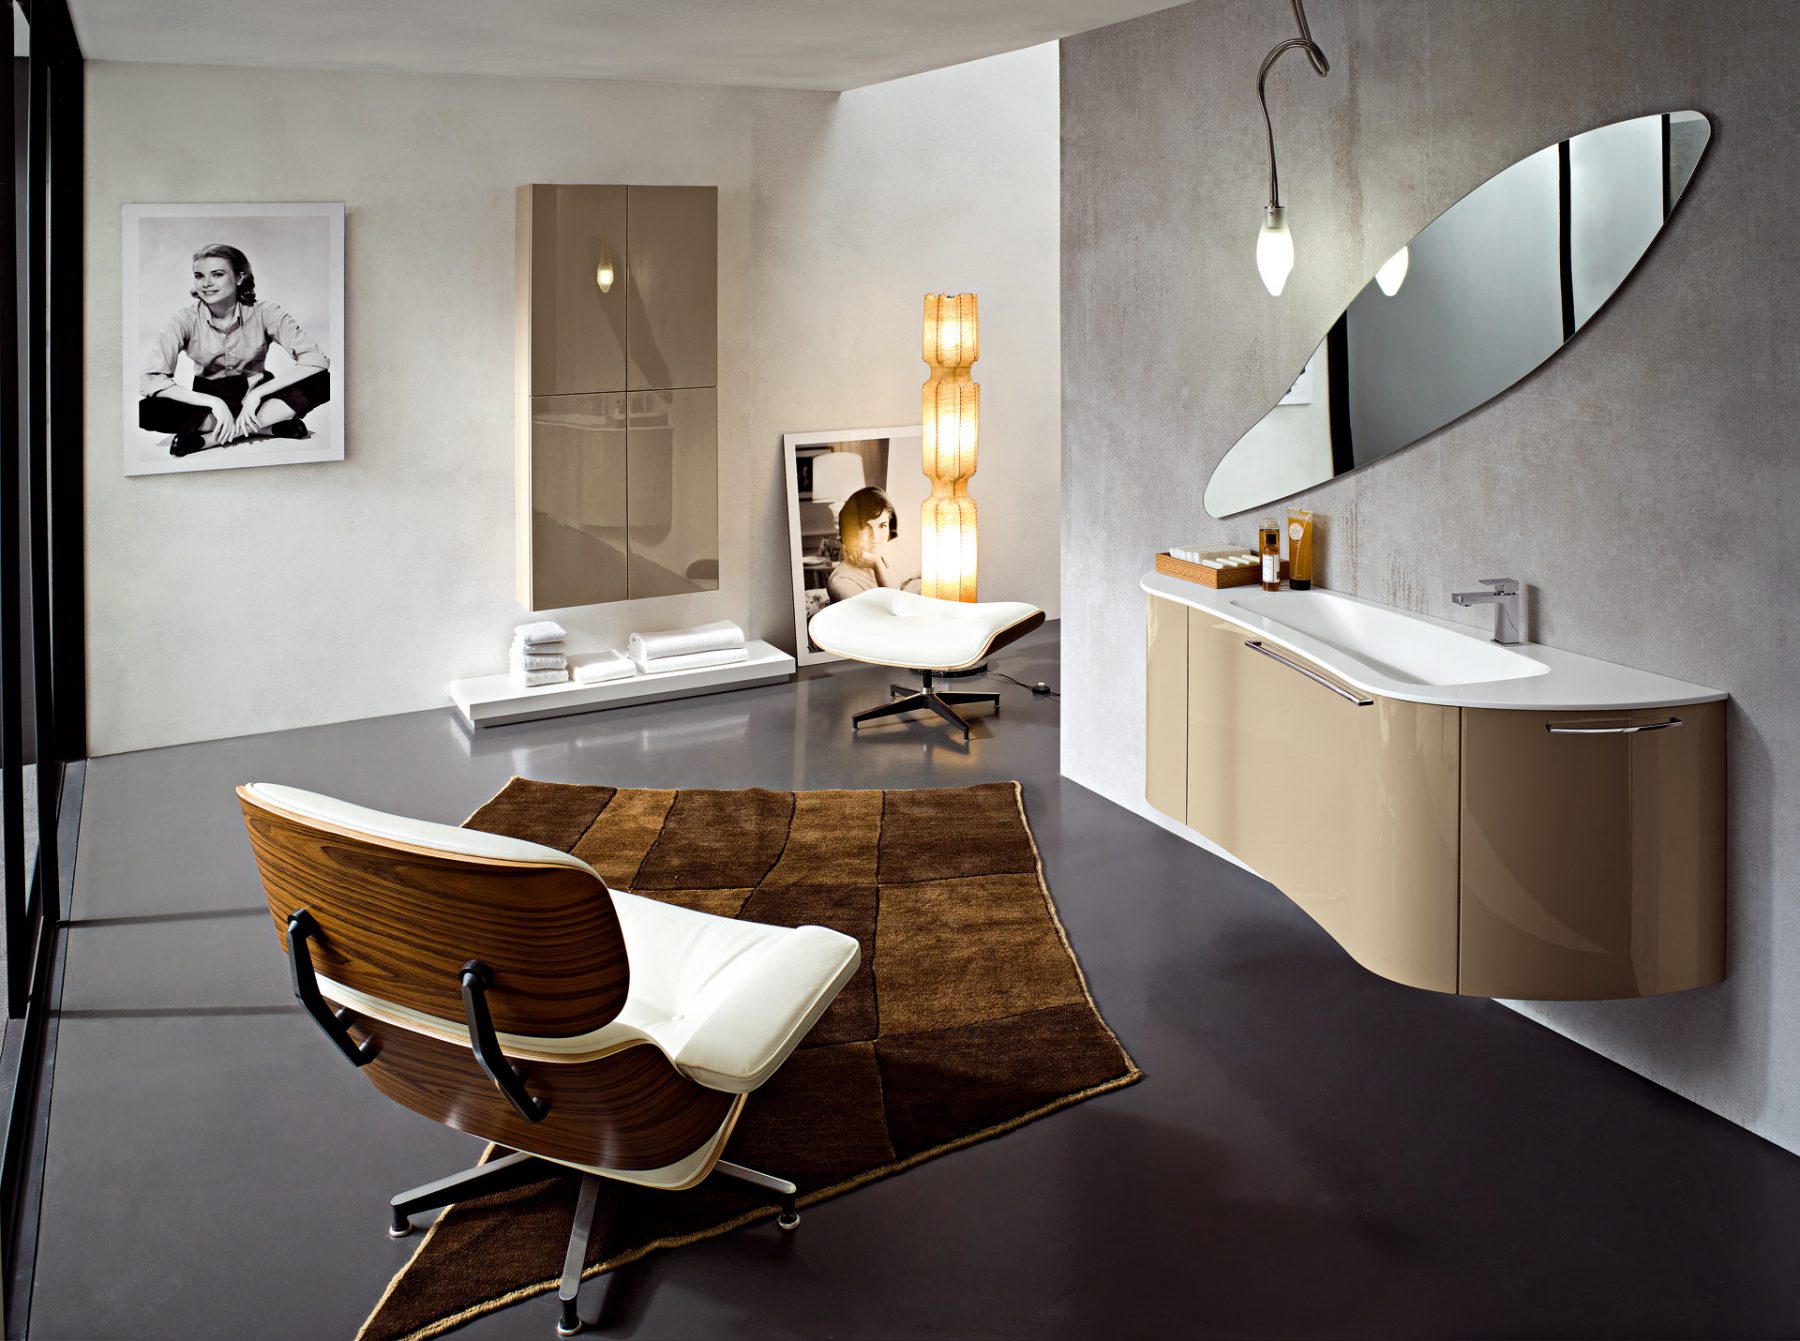 Furnish the bathroom between Minimal and Classic styles